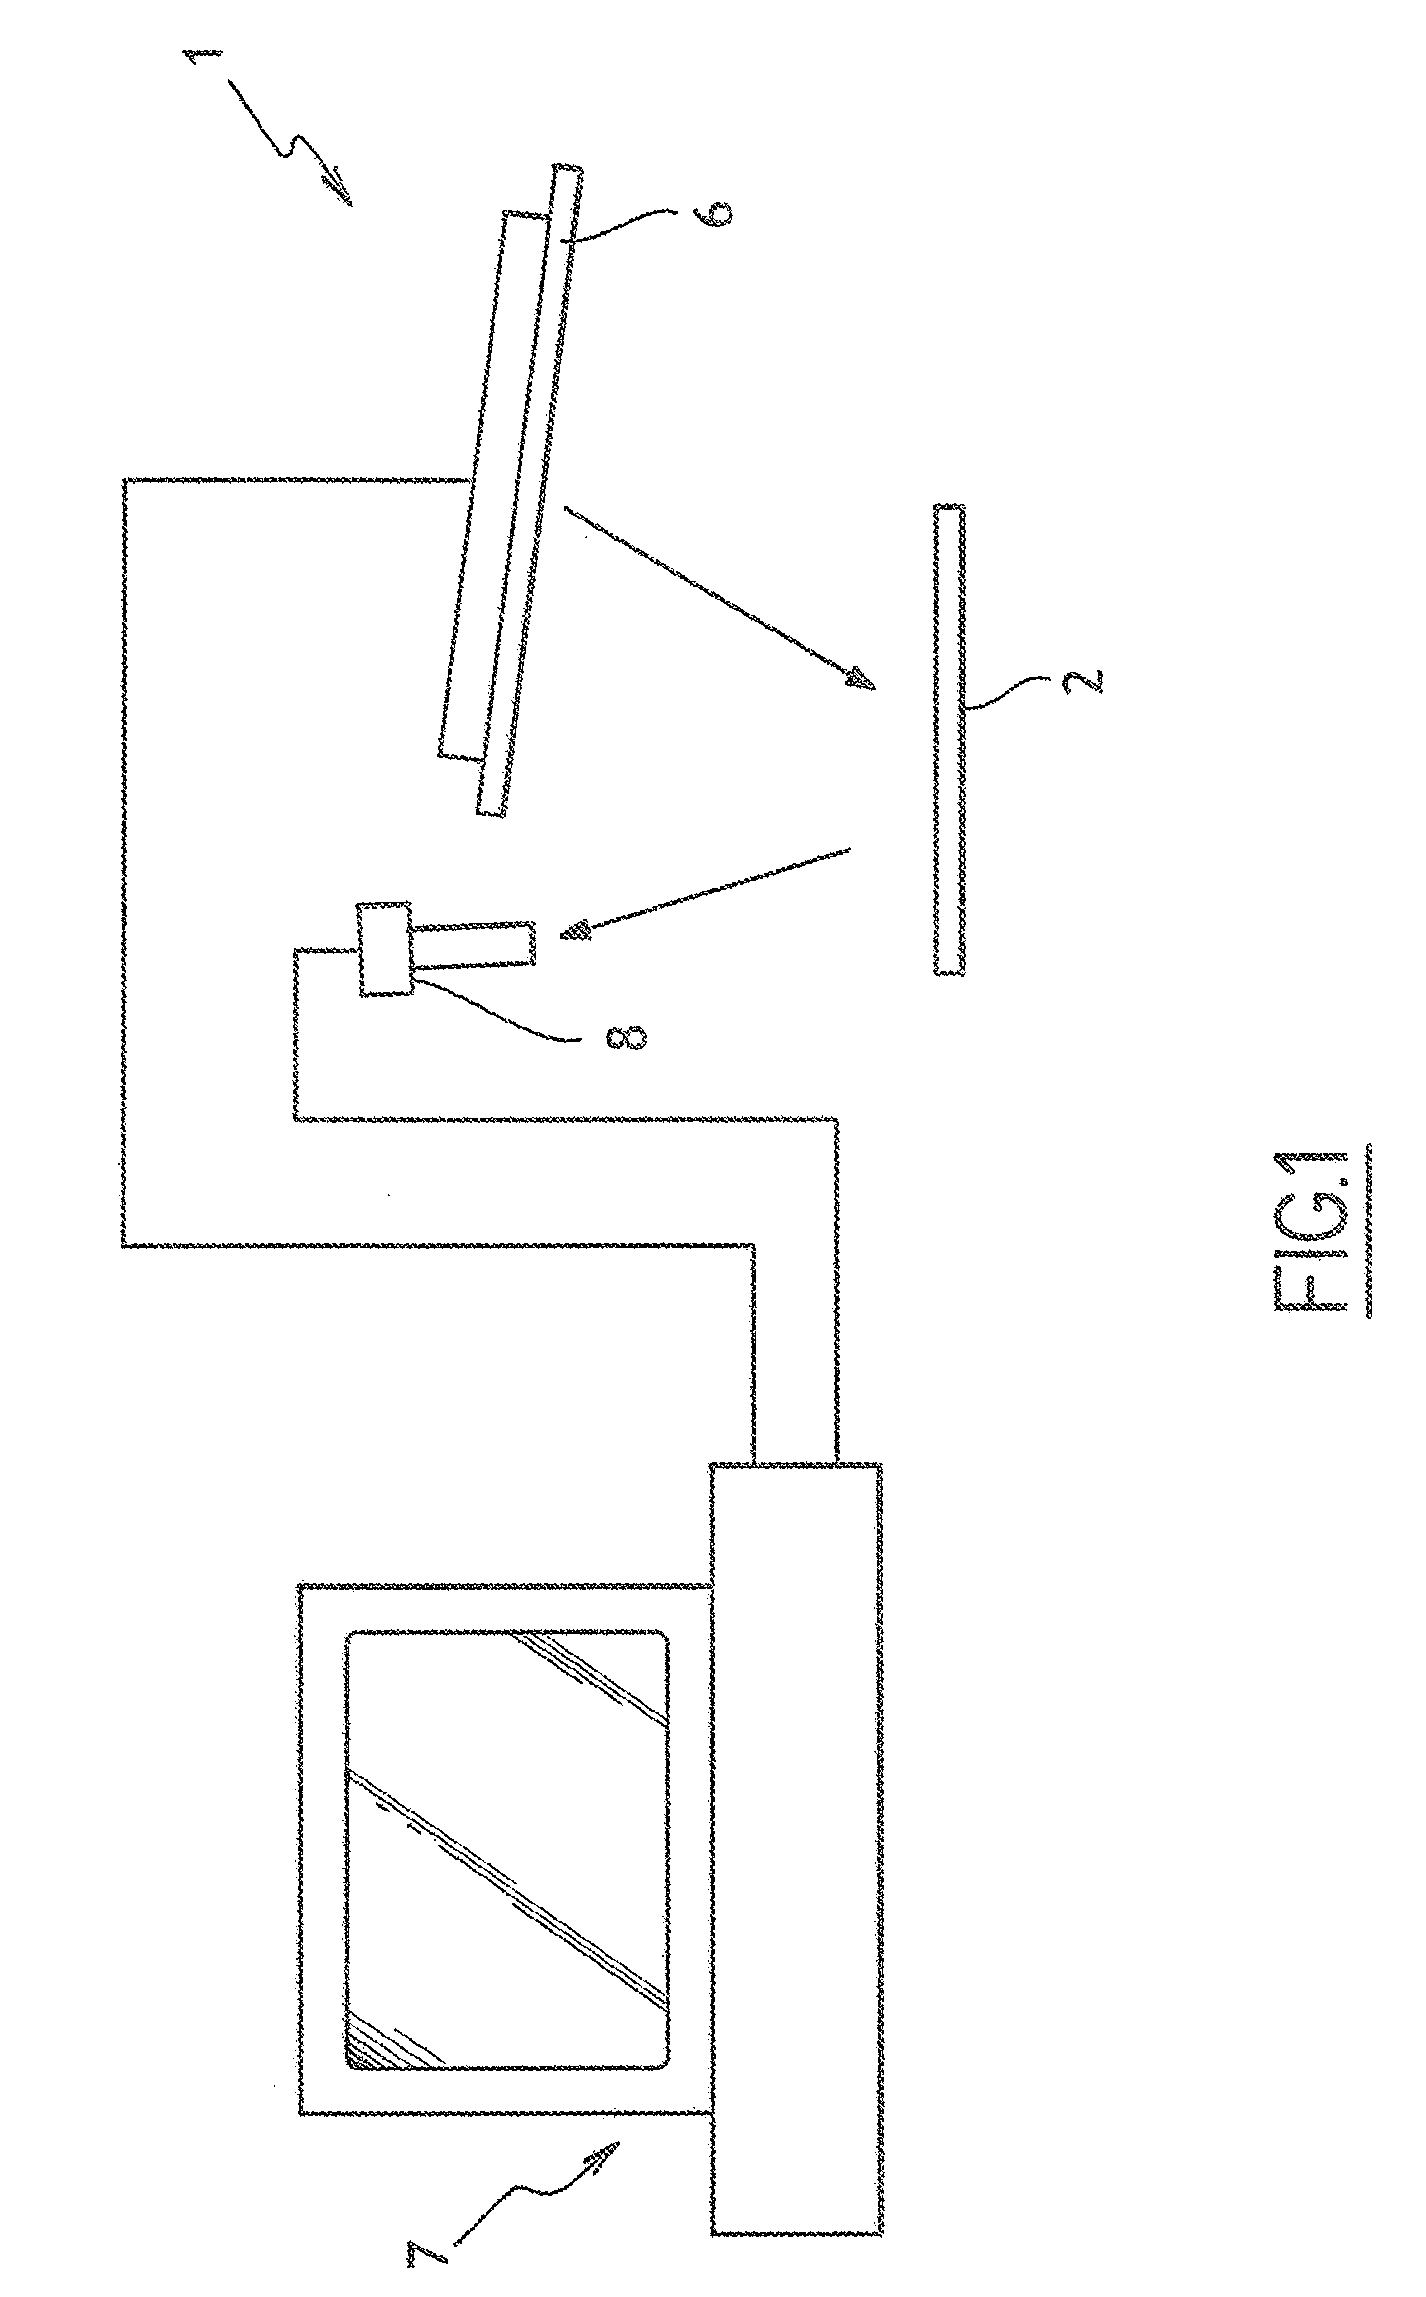 Method for detecting surface defects on a substrate and device using said method